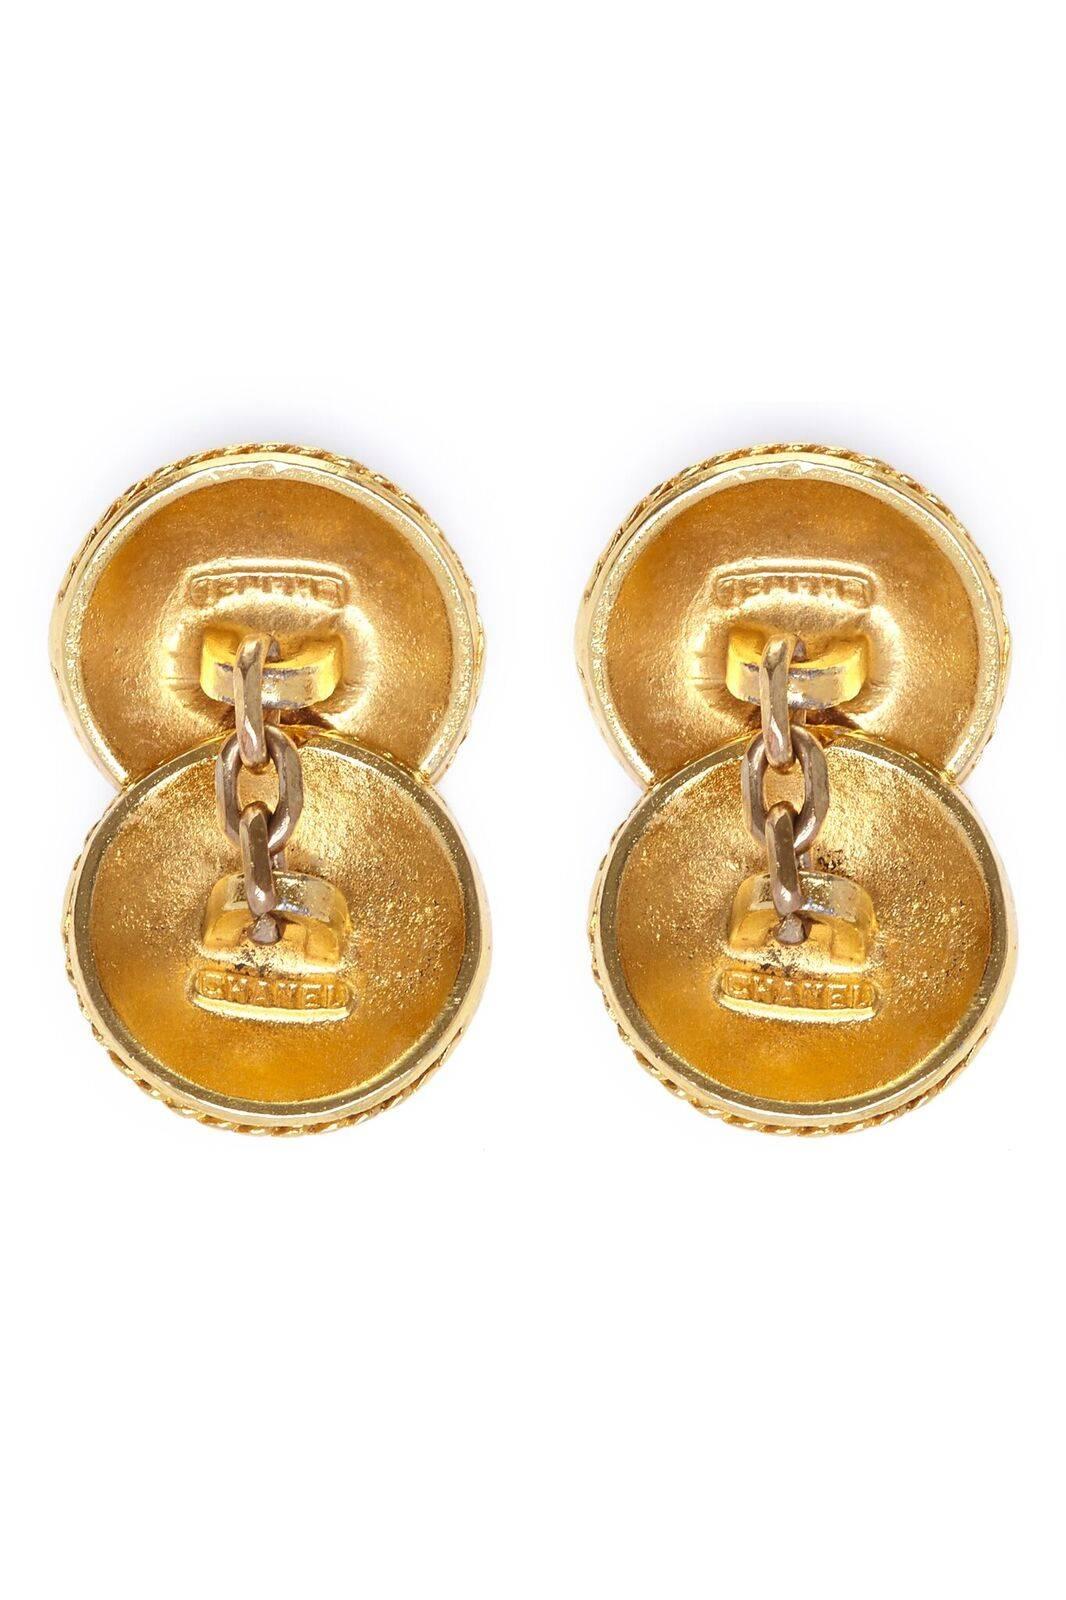 These classic 1990s Chanel gold gilt cufflinks are emblazoned with the signature double CC motif and feature a 3 link chain detail per piece. Each round carries the designer's signature on the reverse and measures 0.6